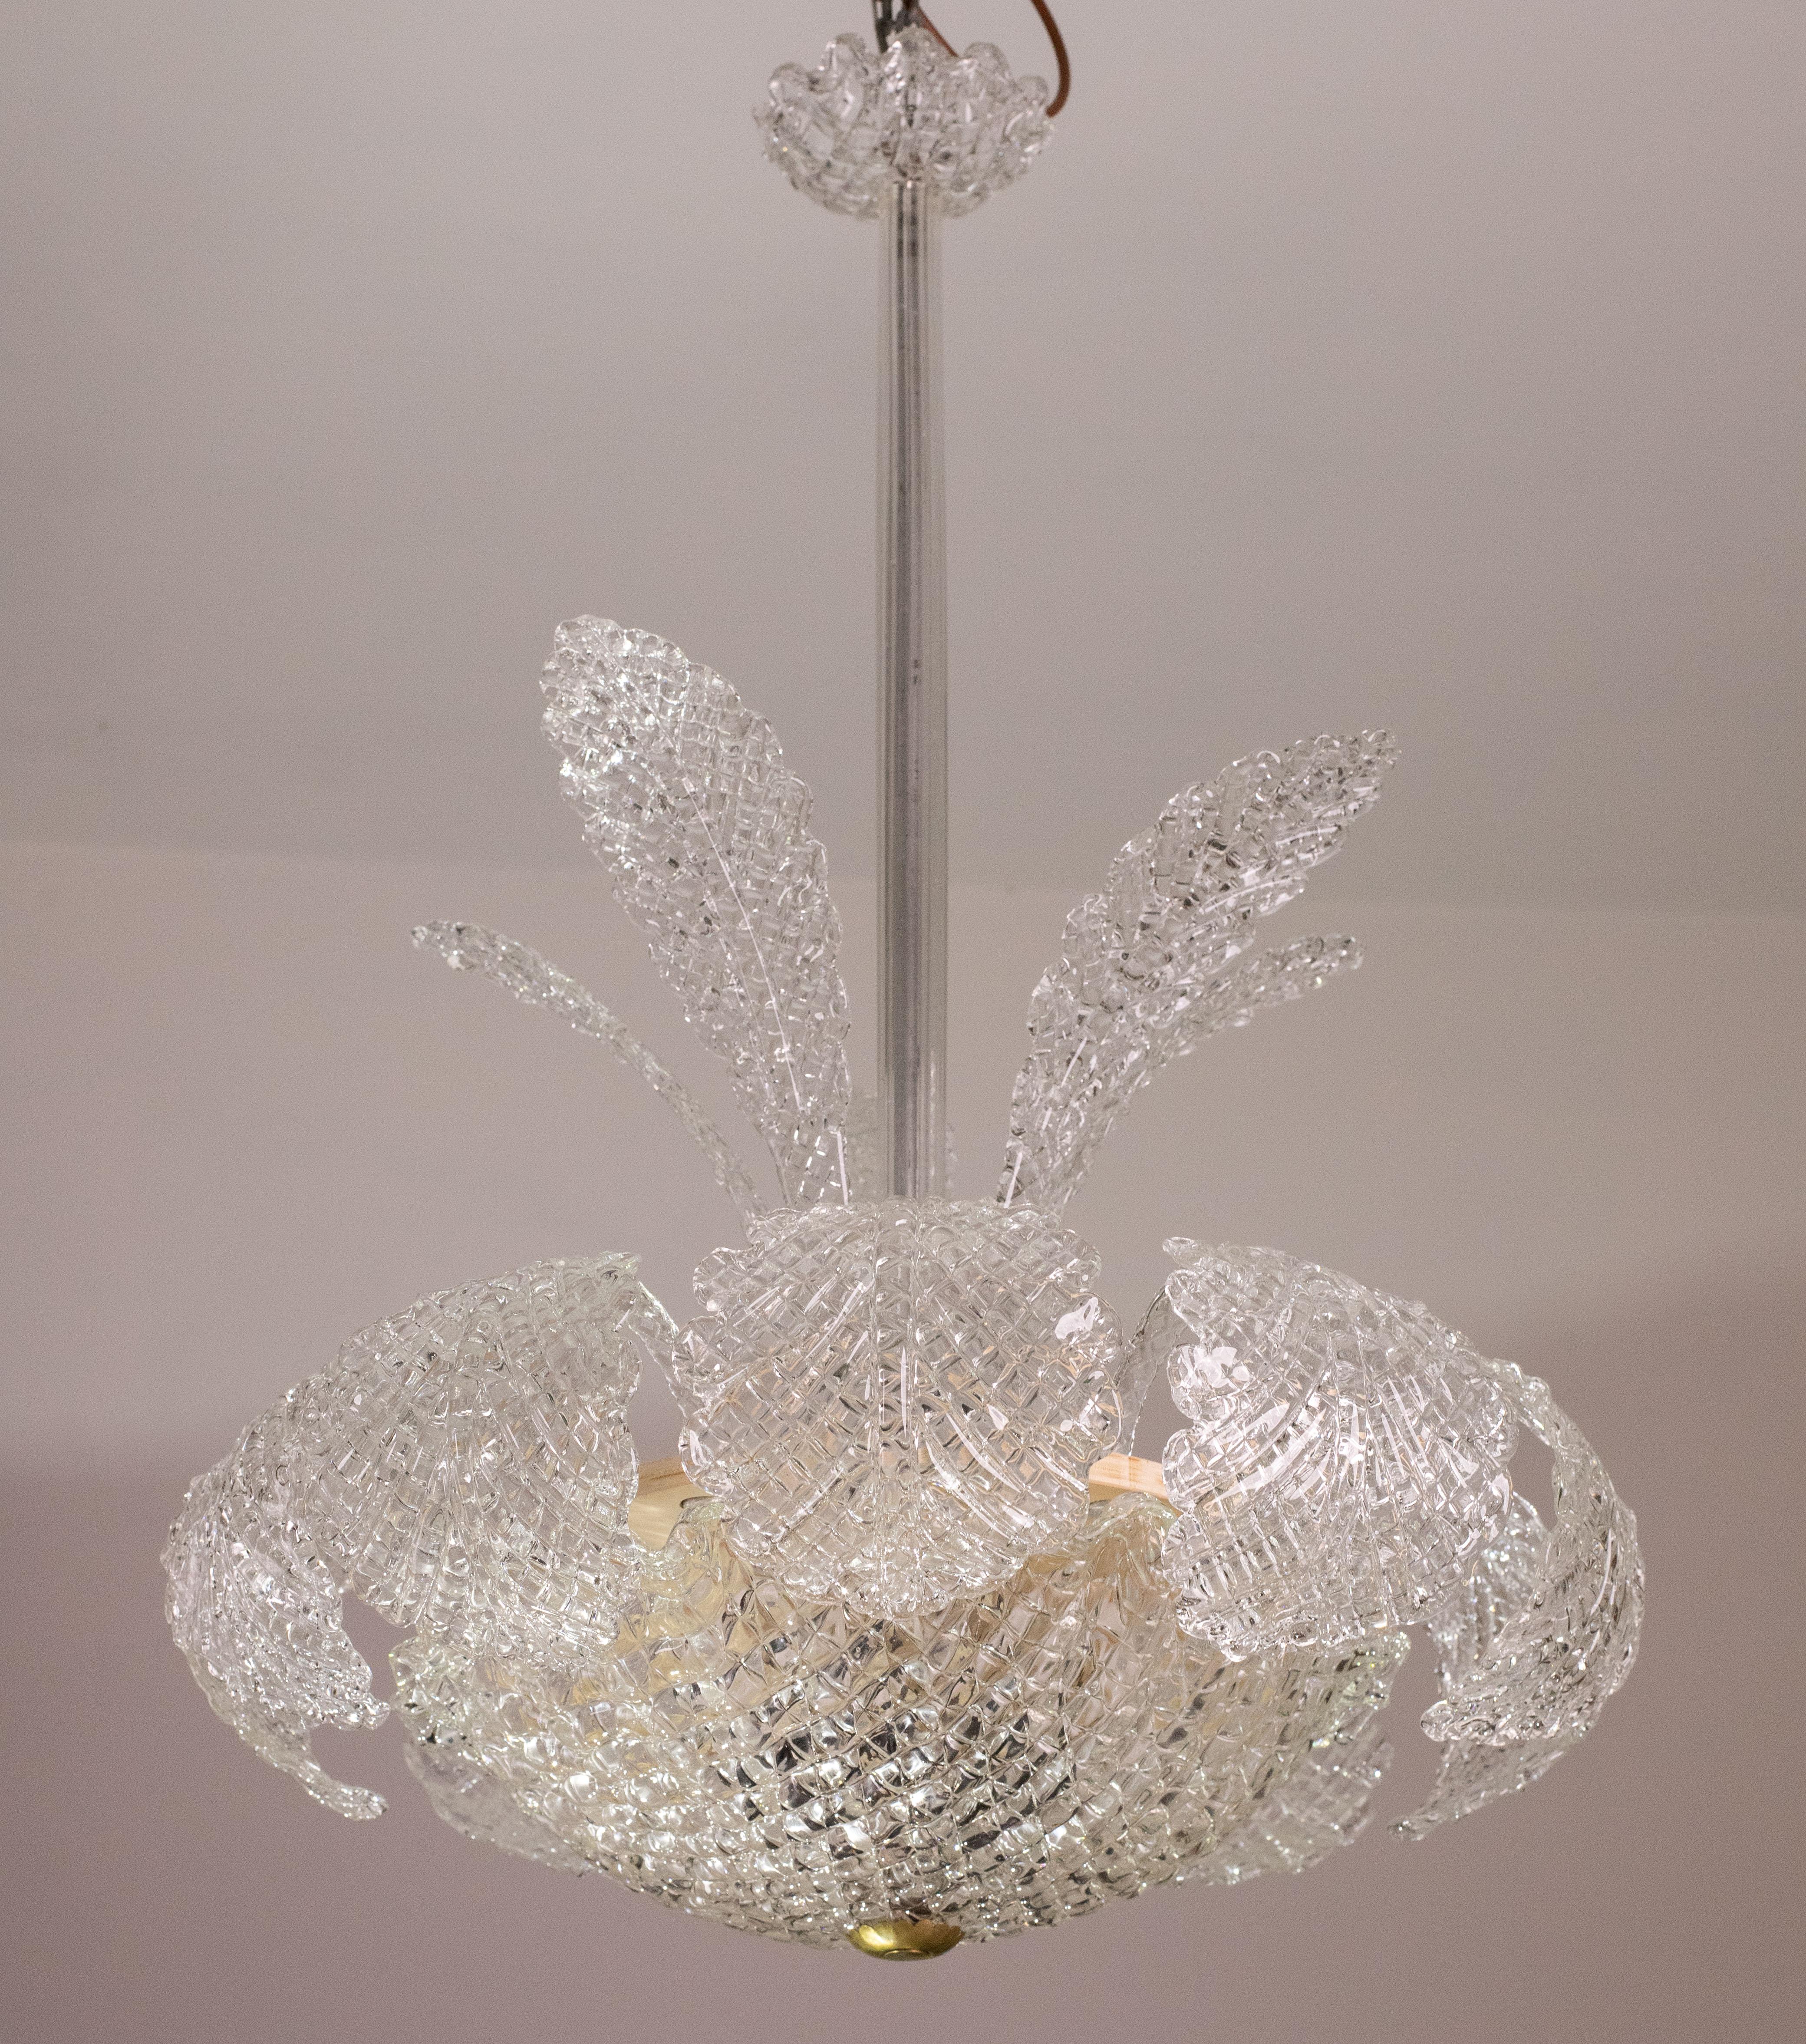 Elegant Art Decò, Barovier & Toso Chandelier, Murano Glass, 1950s In Good Condition For Sale In Roma, IT